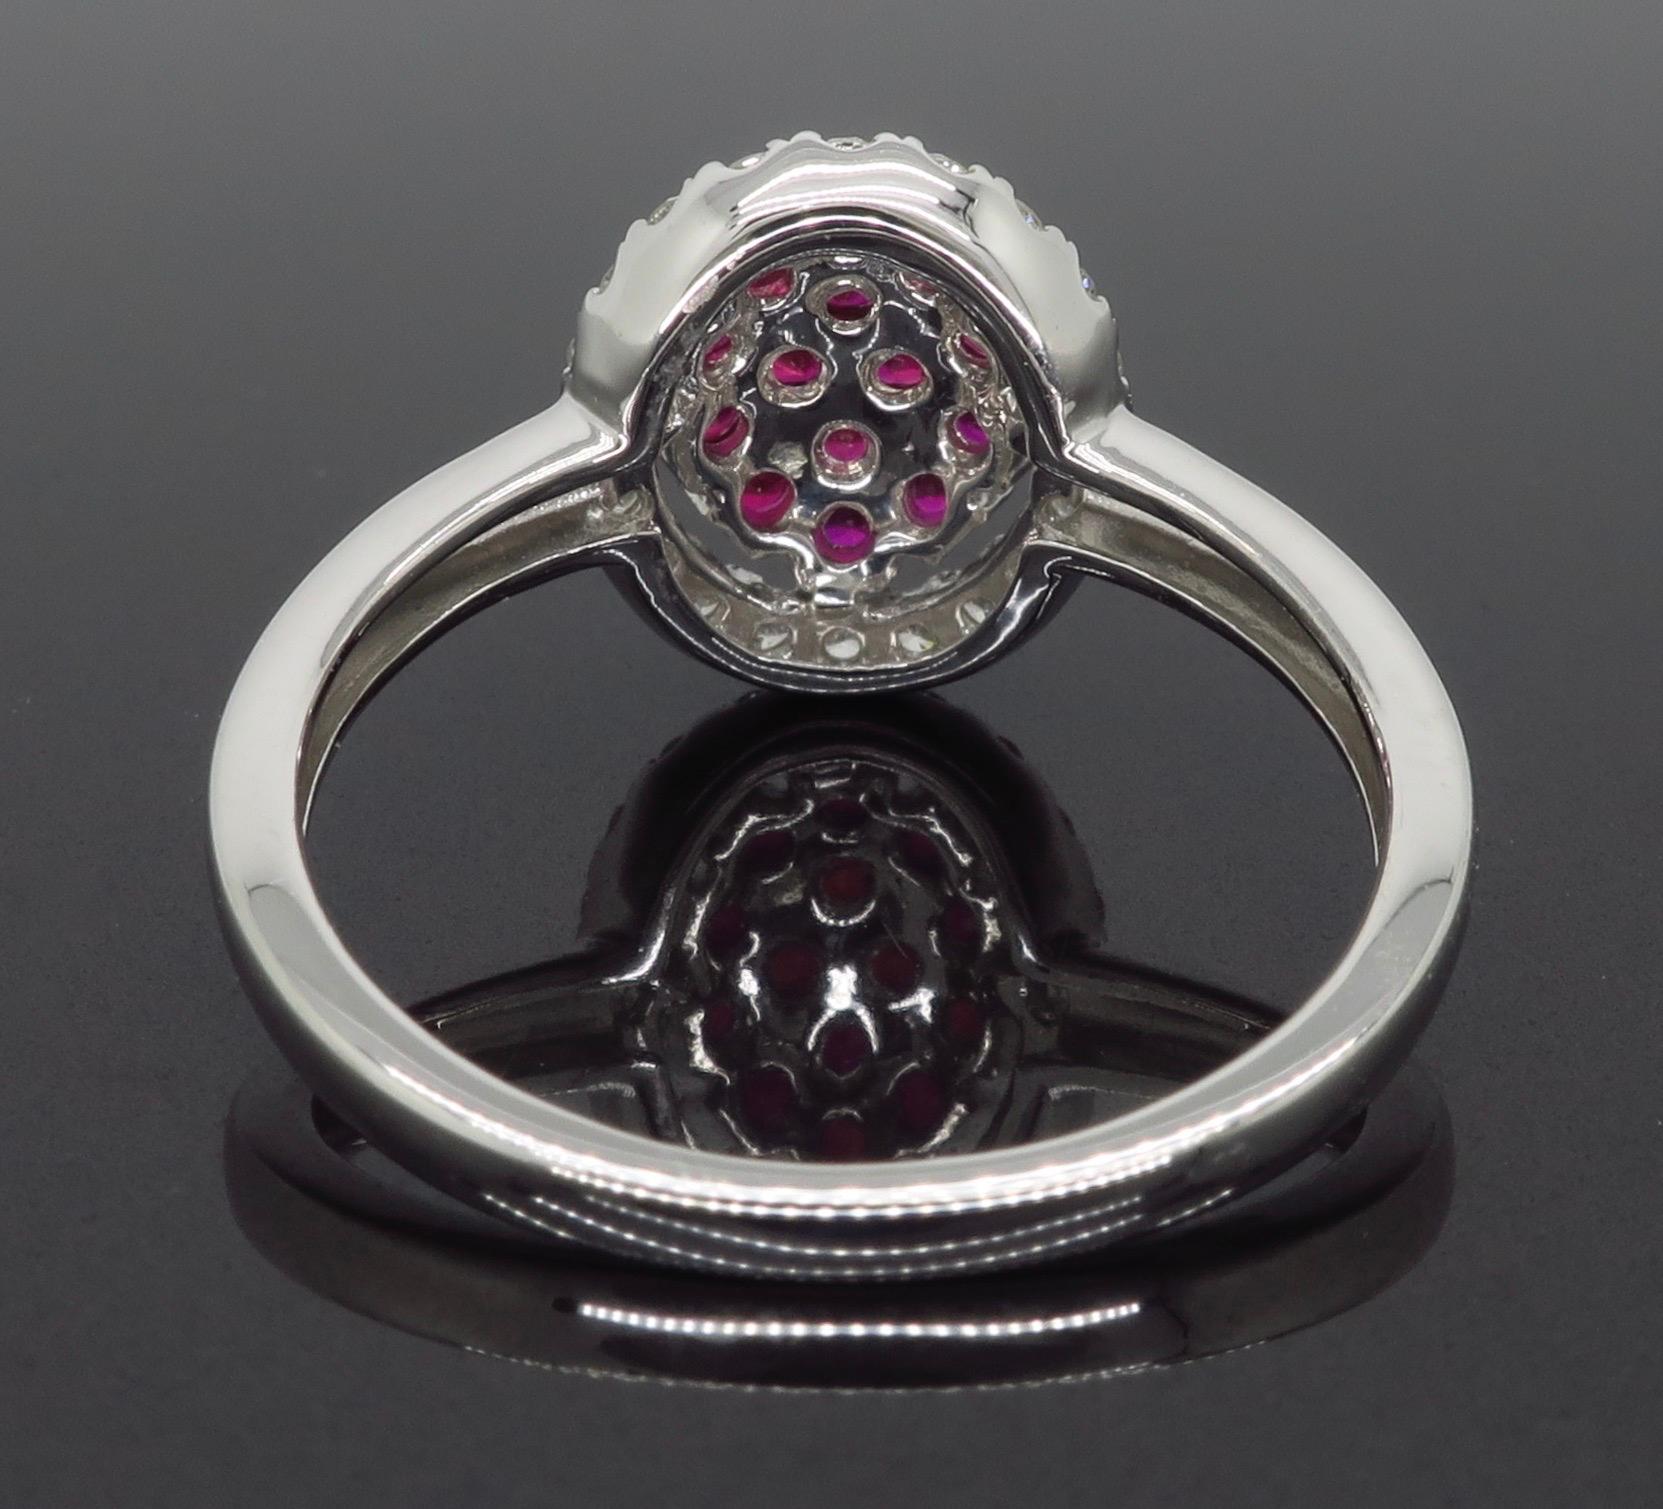 Round Cut Cluster Ruby Ring Surrounded by a Halo of Diamonds